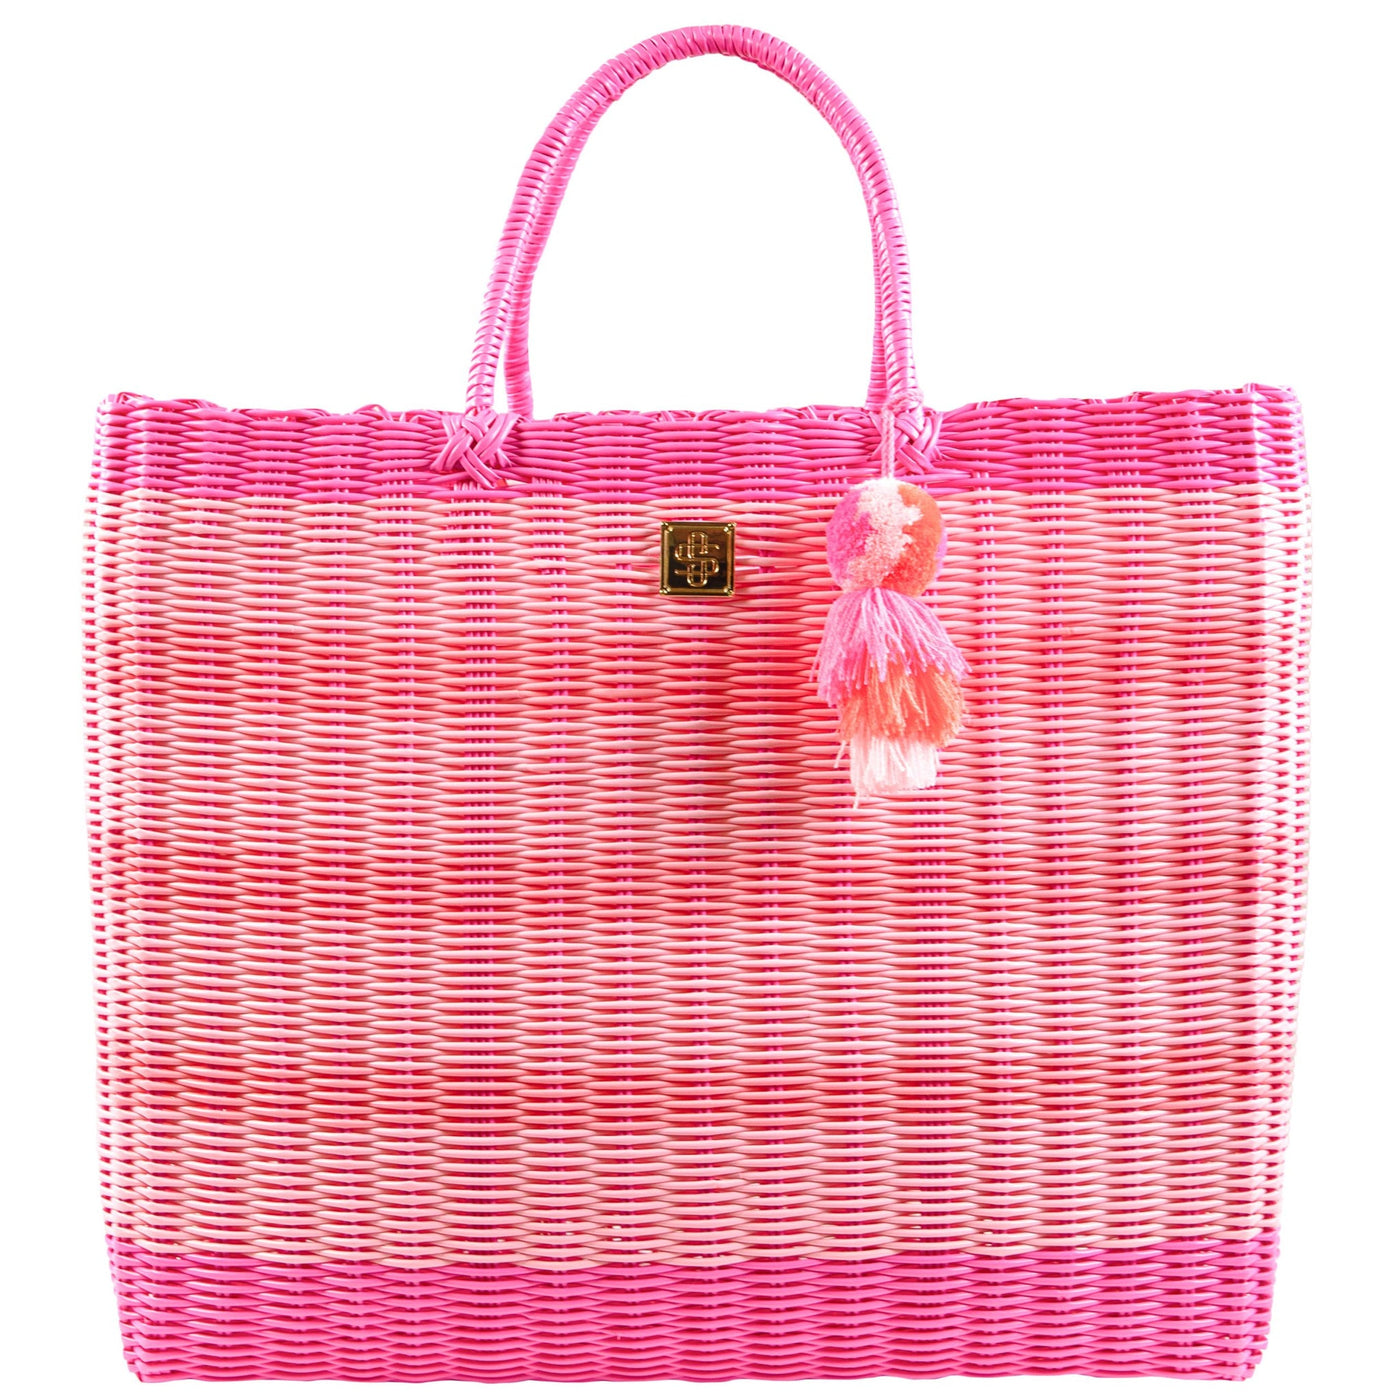 Simply Southern Key Largo Large Tote